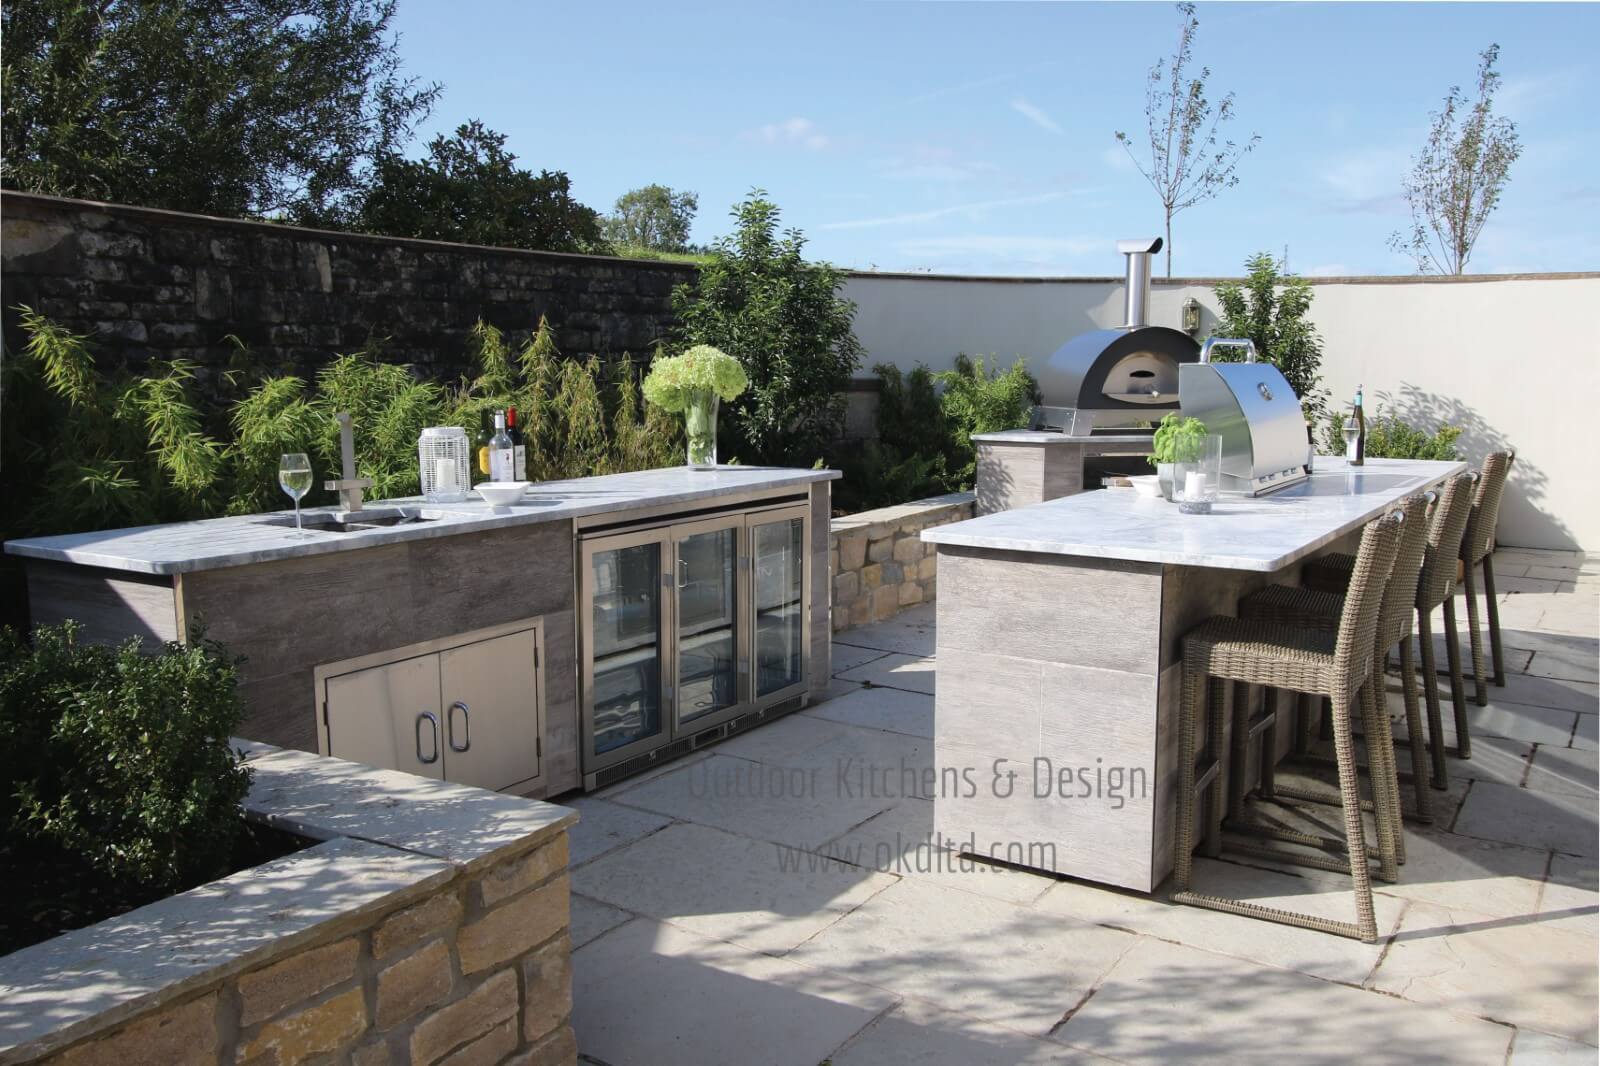 Modular Outdoor Kitchen with a large Ciao pizza oven & Bull appliances